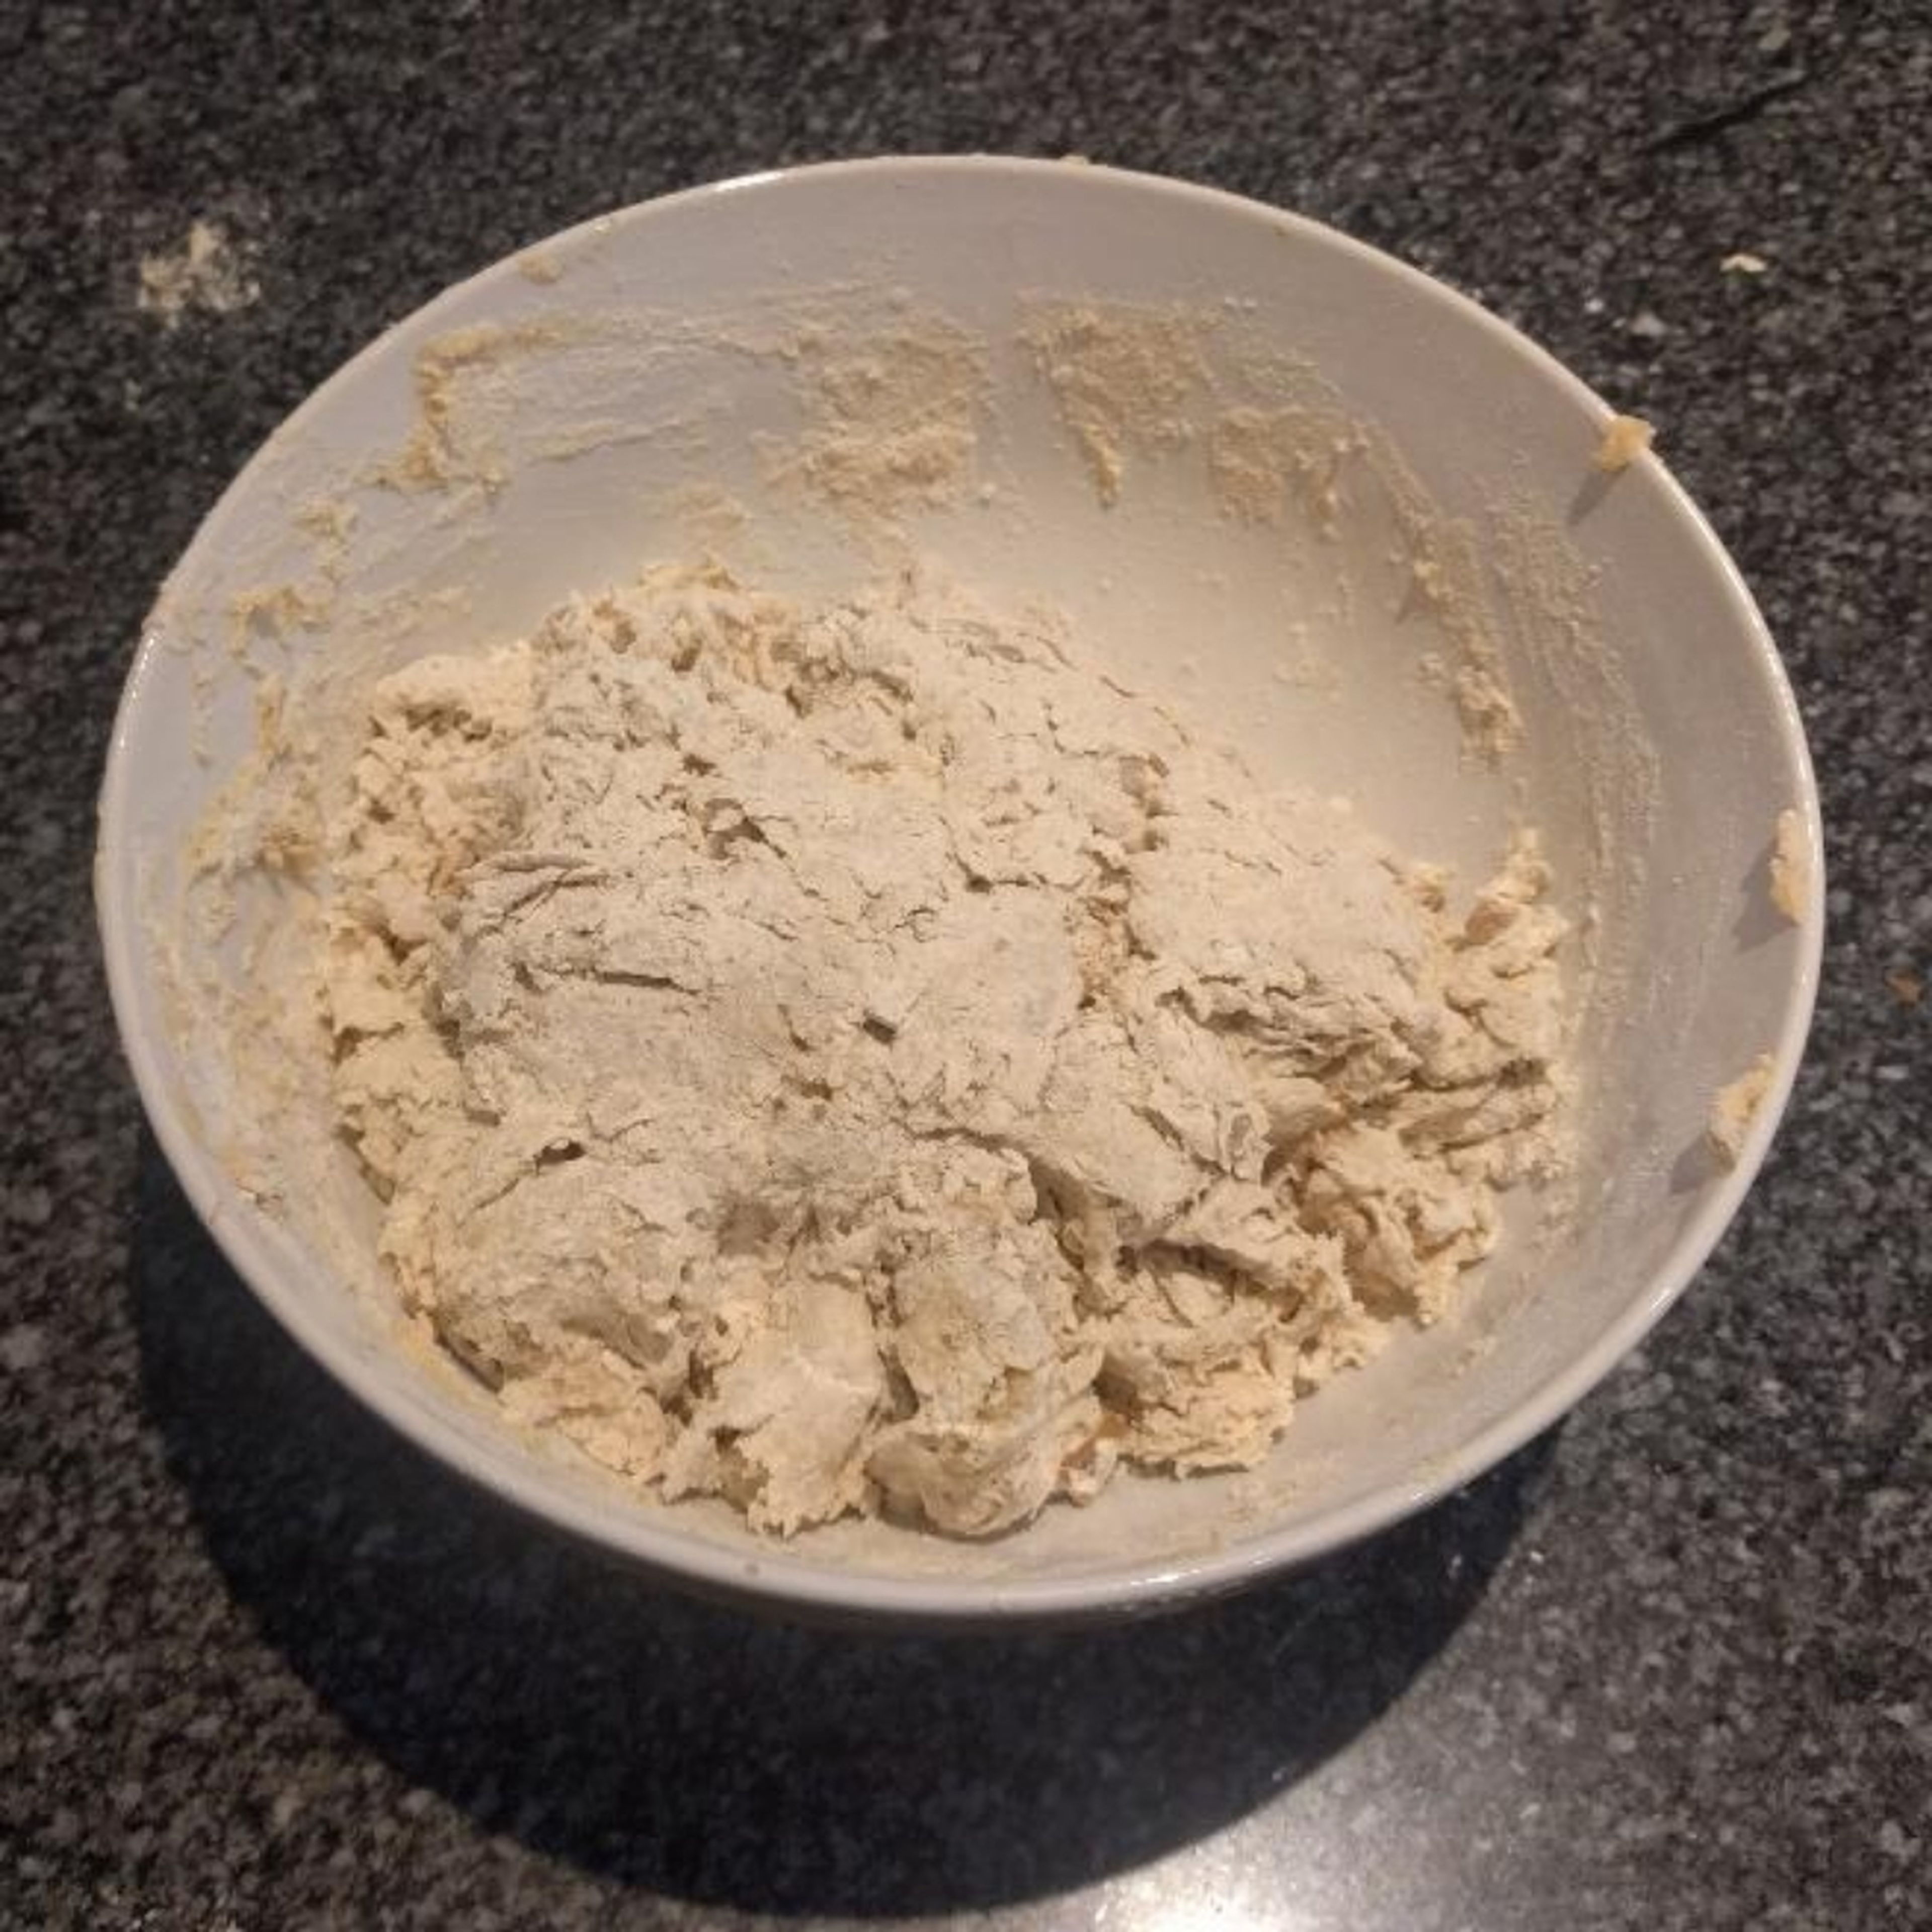 Keep mixing water, if you overwater, add a bit of white flour into the mix and try moulding it again. Either way, you'll have to get messy.